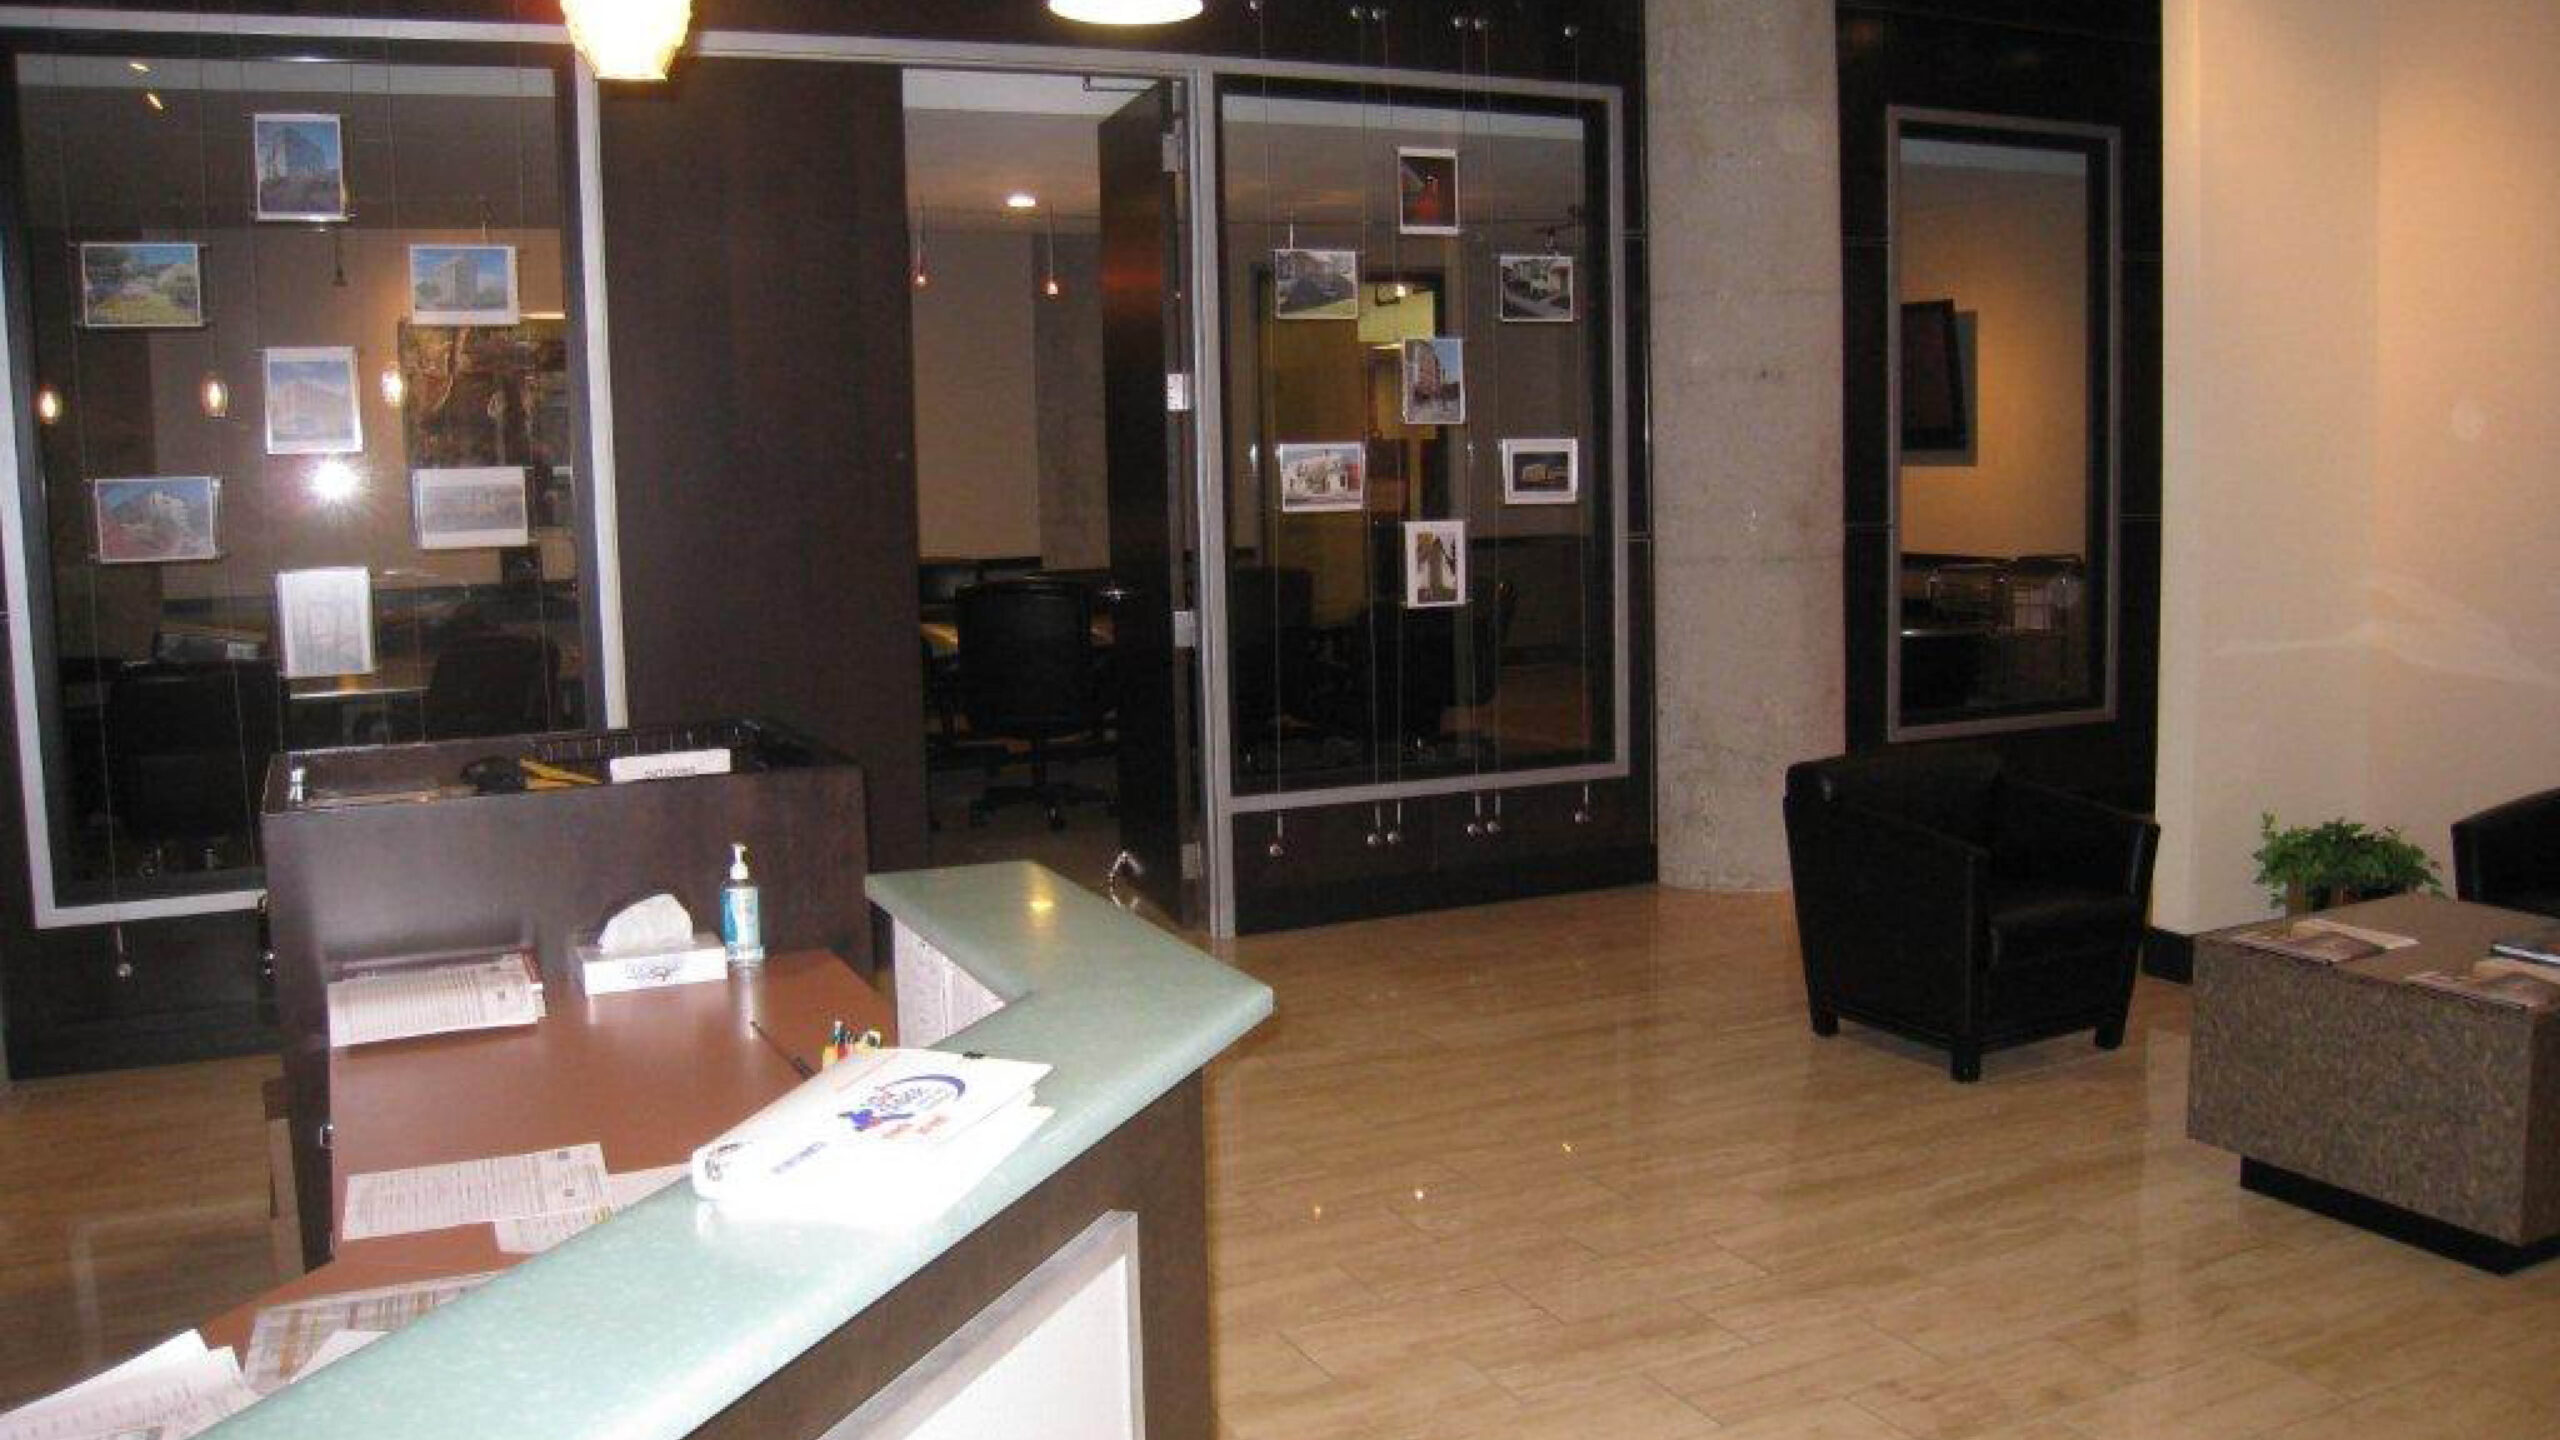 Lobby of a bank with front desk